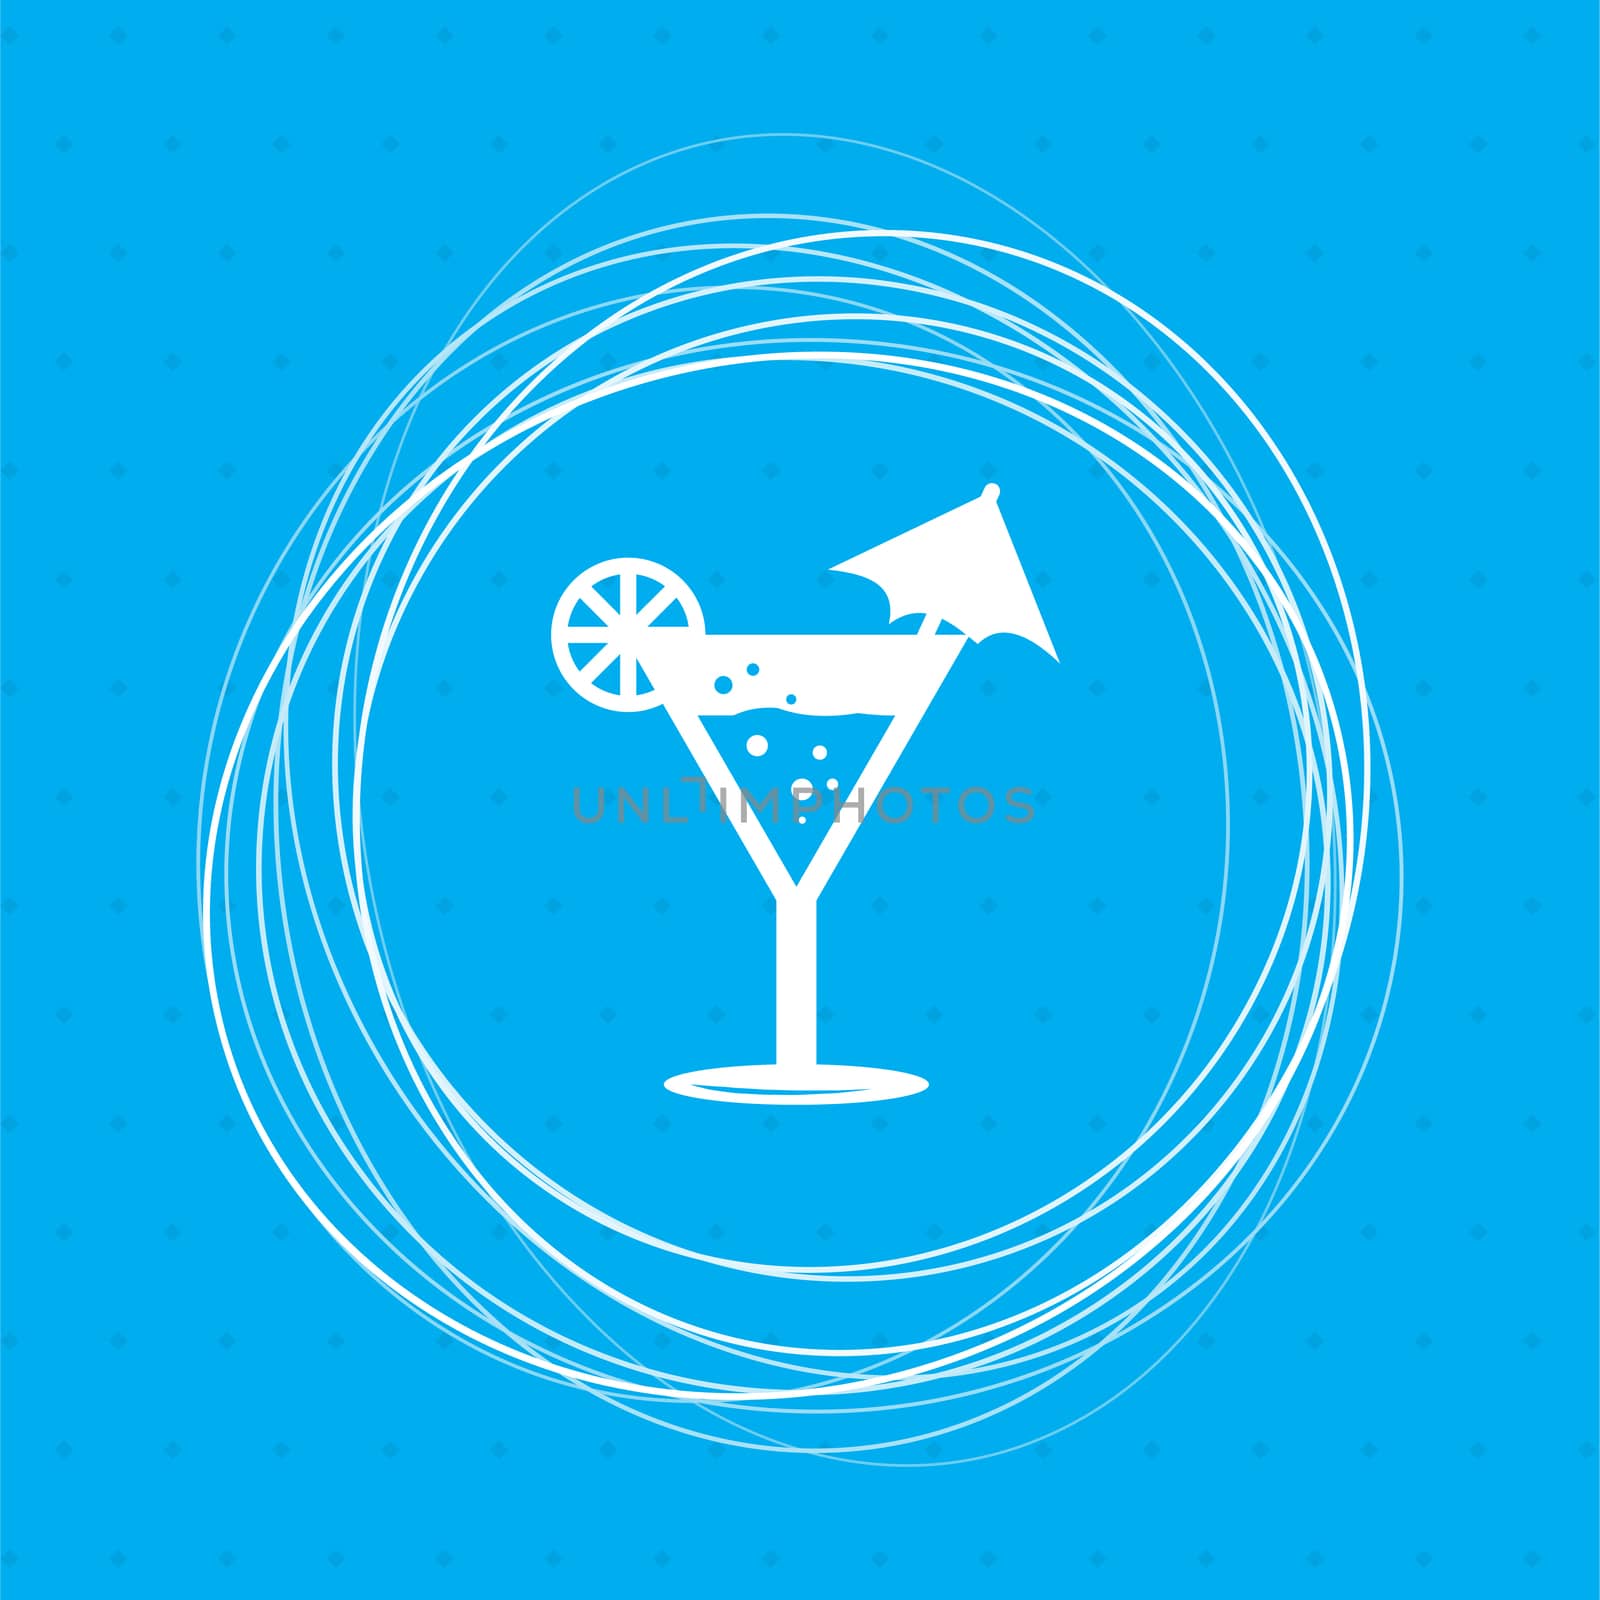 Cocktail party, martini icon on a blue background with abstract circles around and place for your text.  by Adamchuk